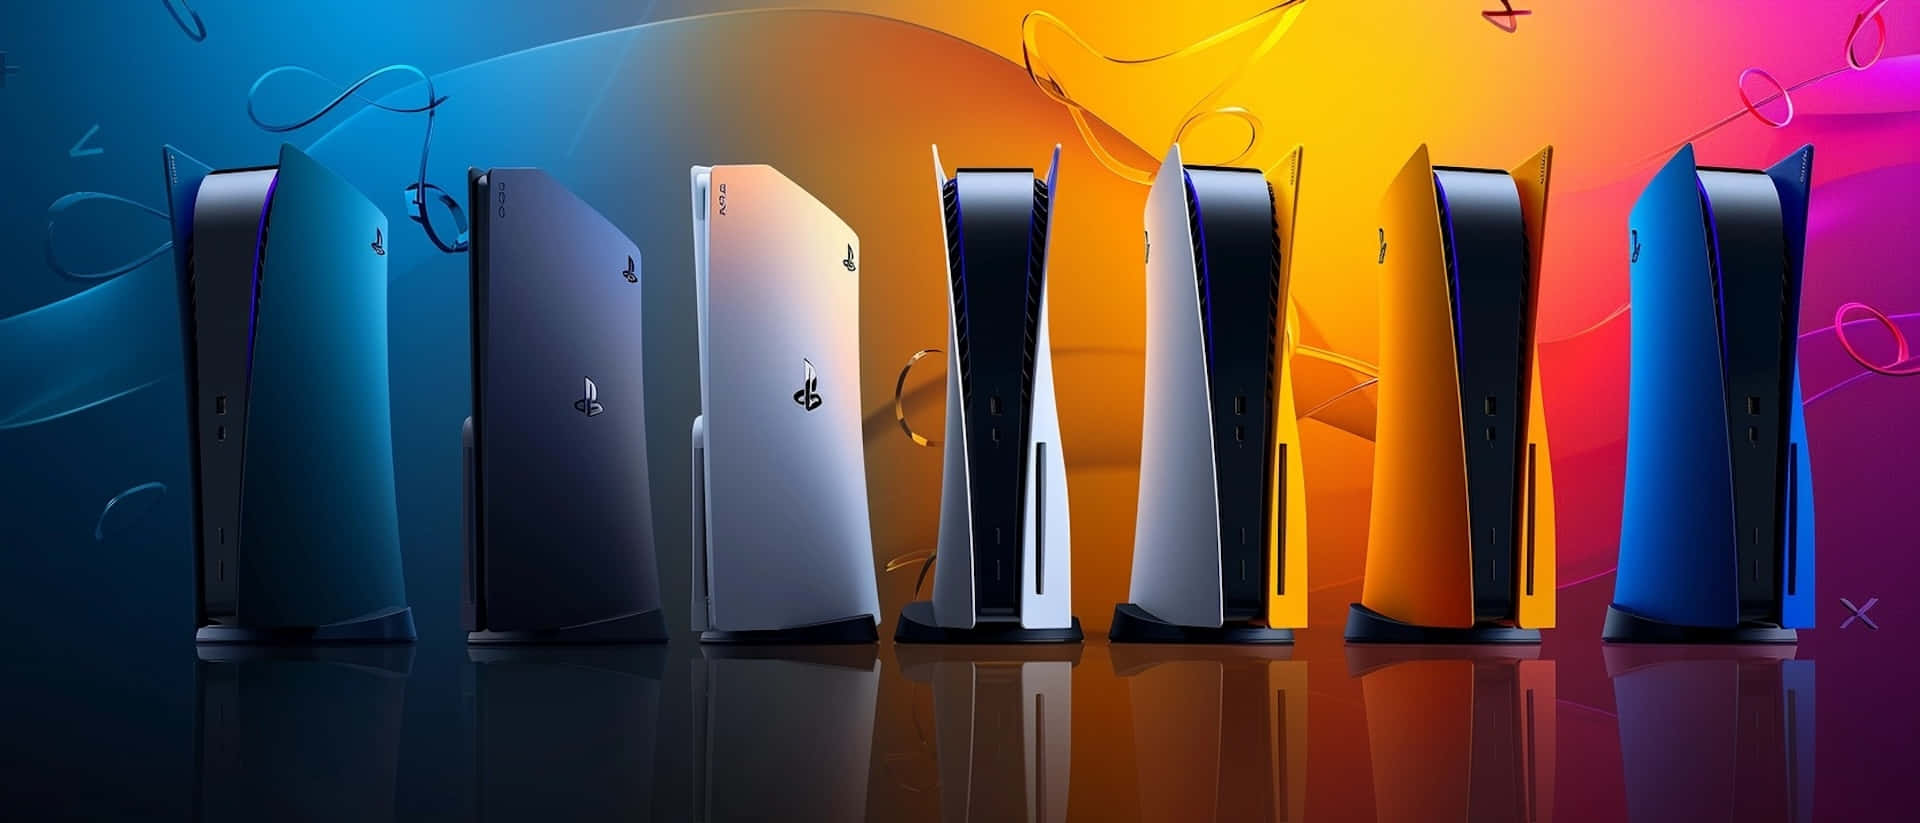 Play Station5 Consoles Colorful Background Wallpaper